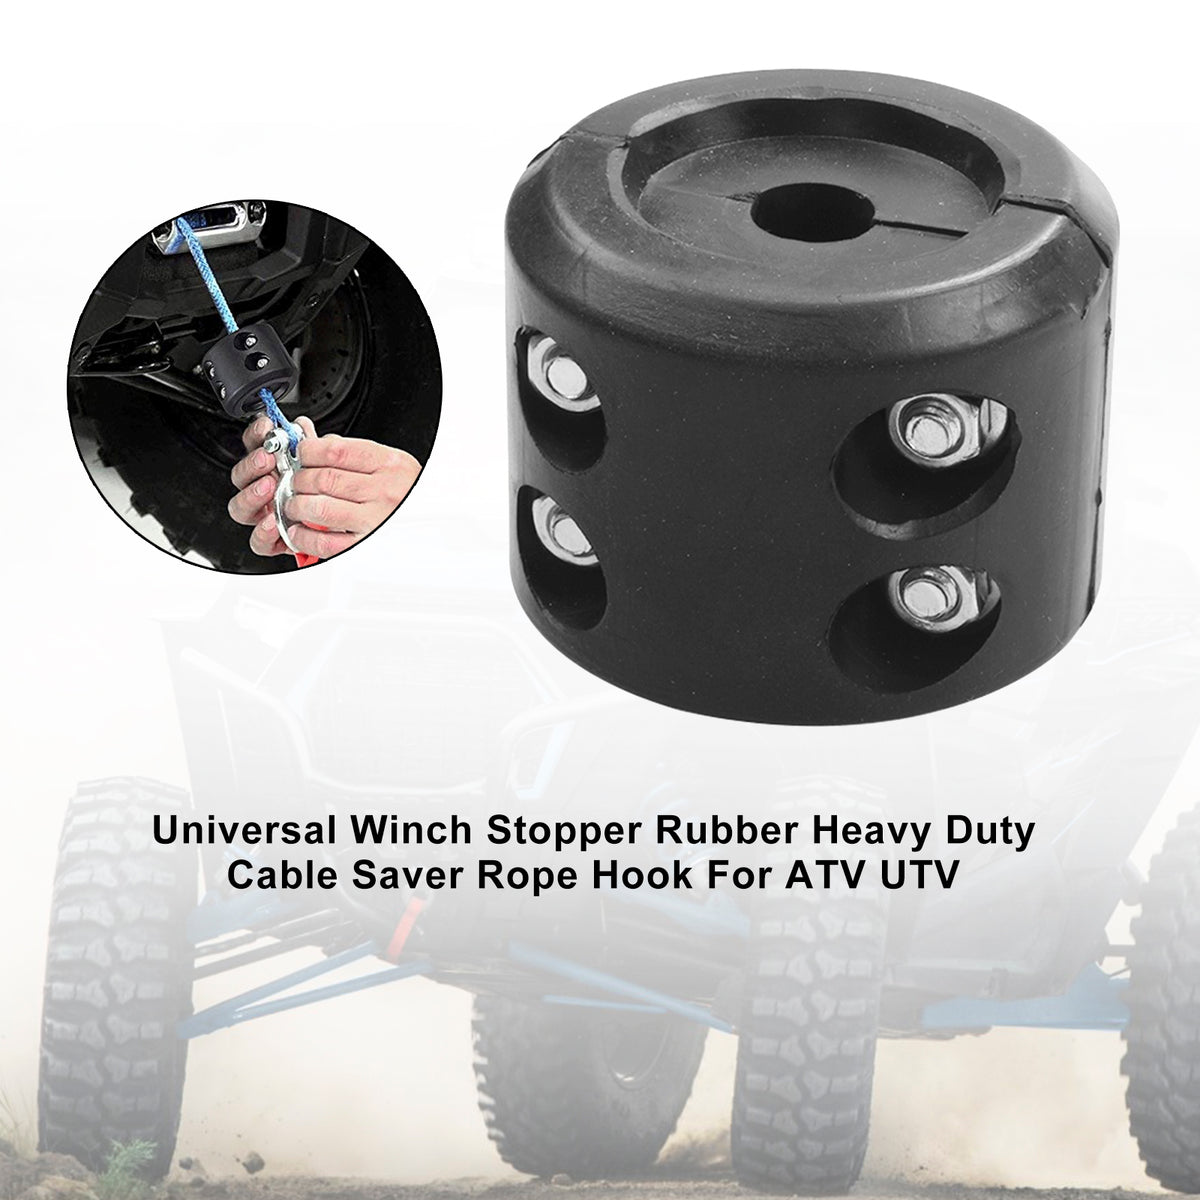 Universal Winch Stopper Rubber Heavy Duty Cable Saver Rope Hook For Atv Utv